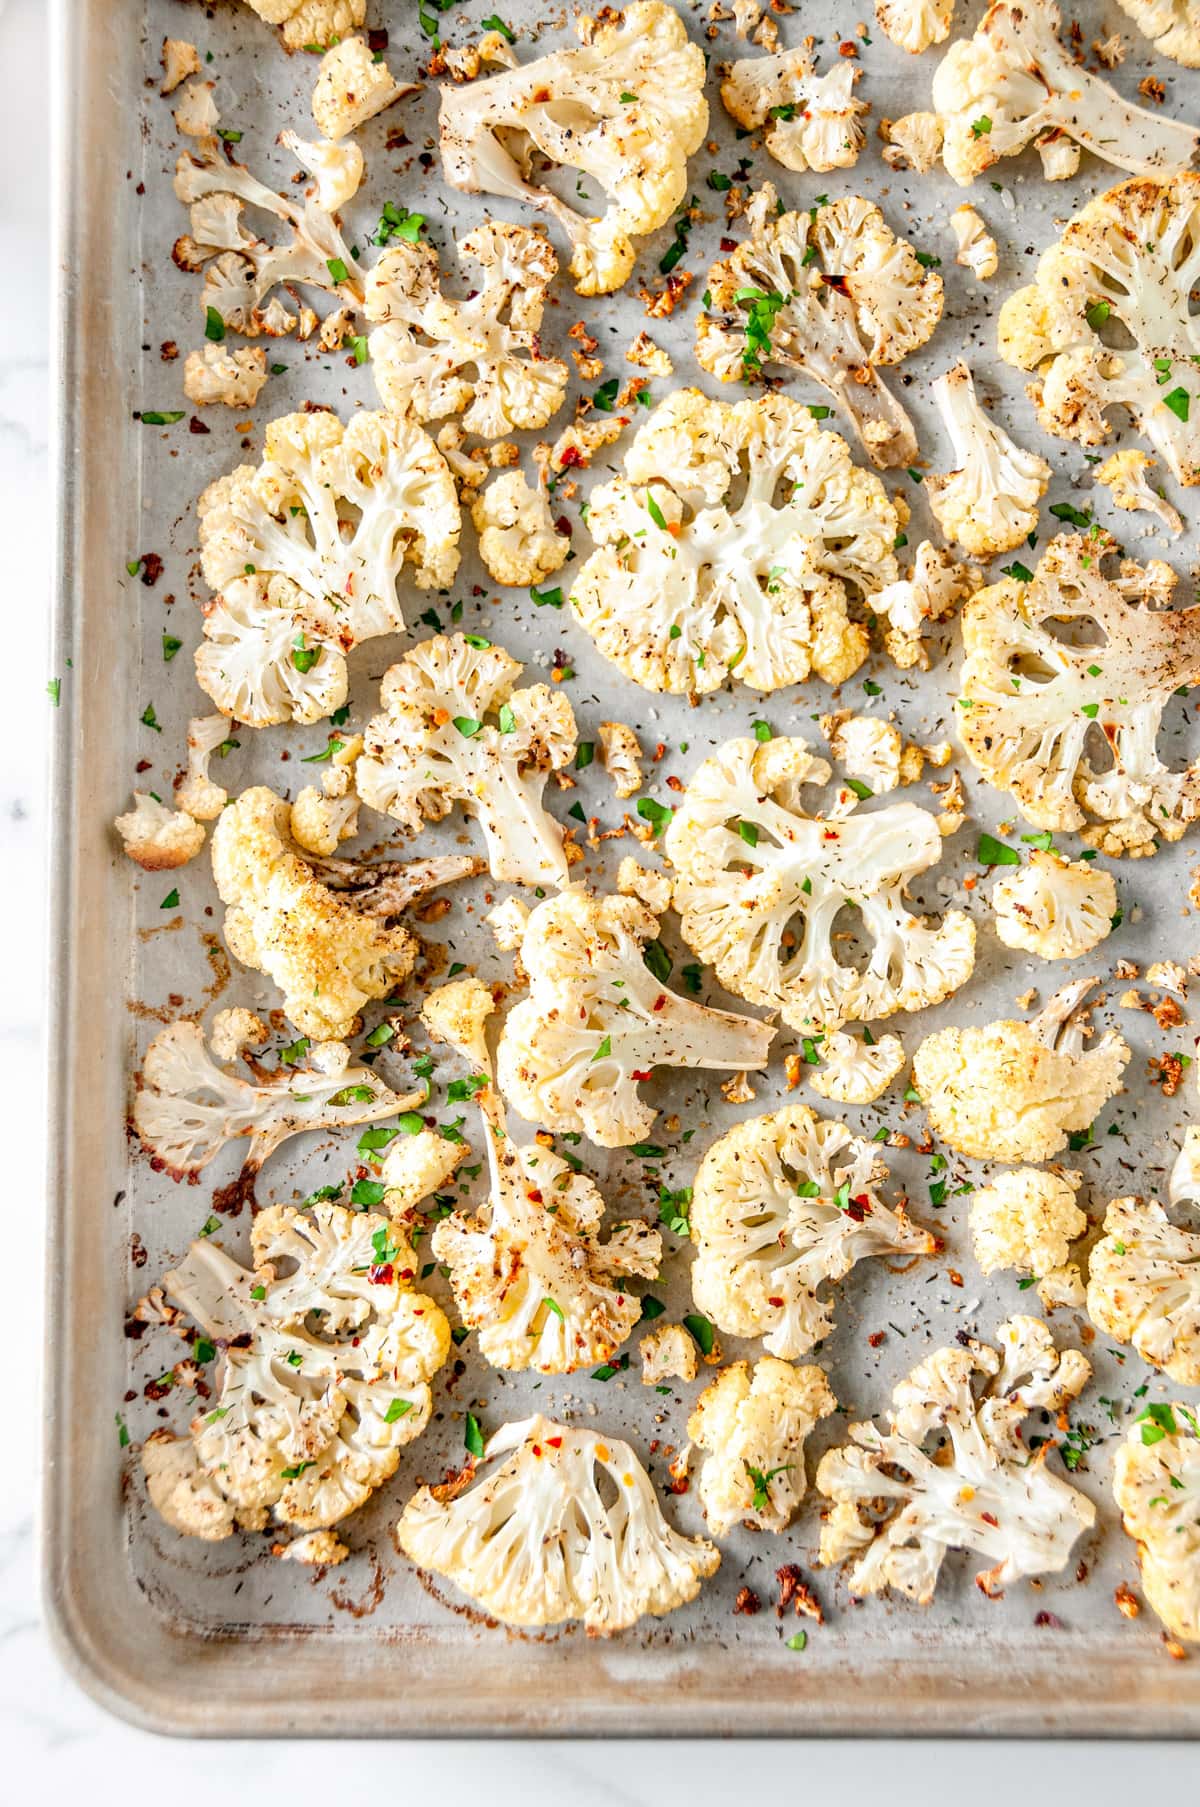 4-Ingredient Roasted Cauliflower on sheet pan with roughly chopped fresh parsley and red chili flakes